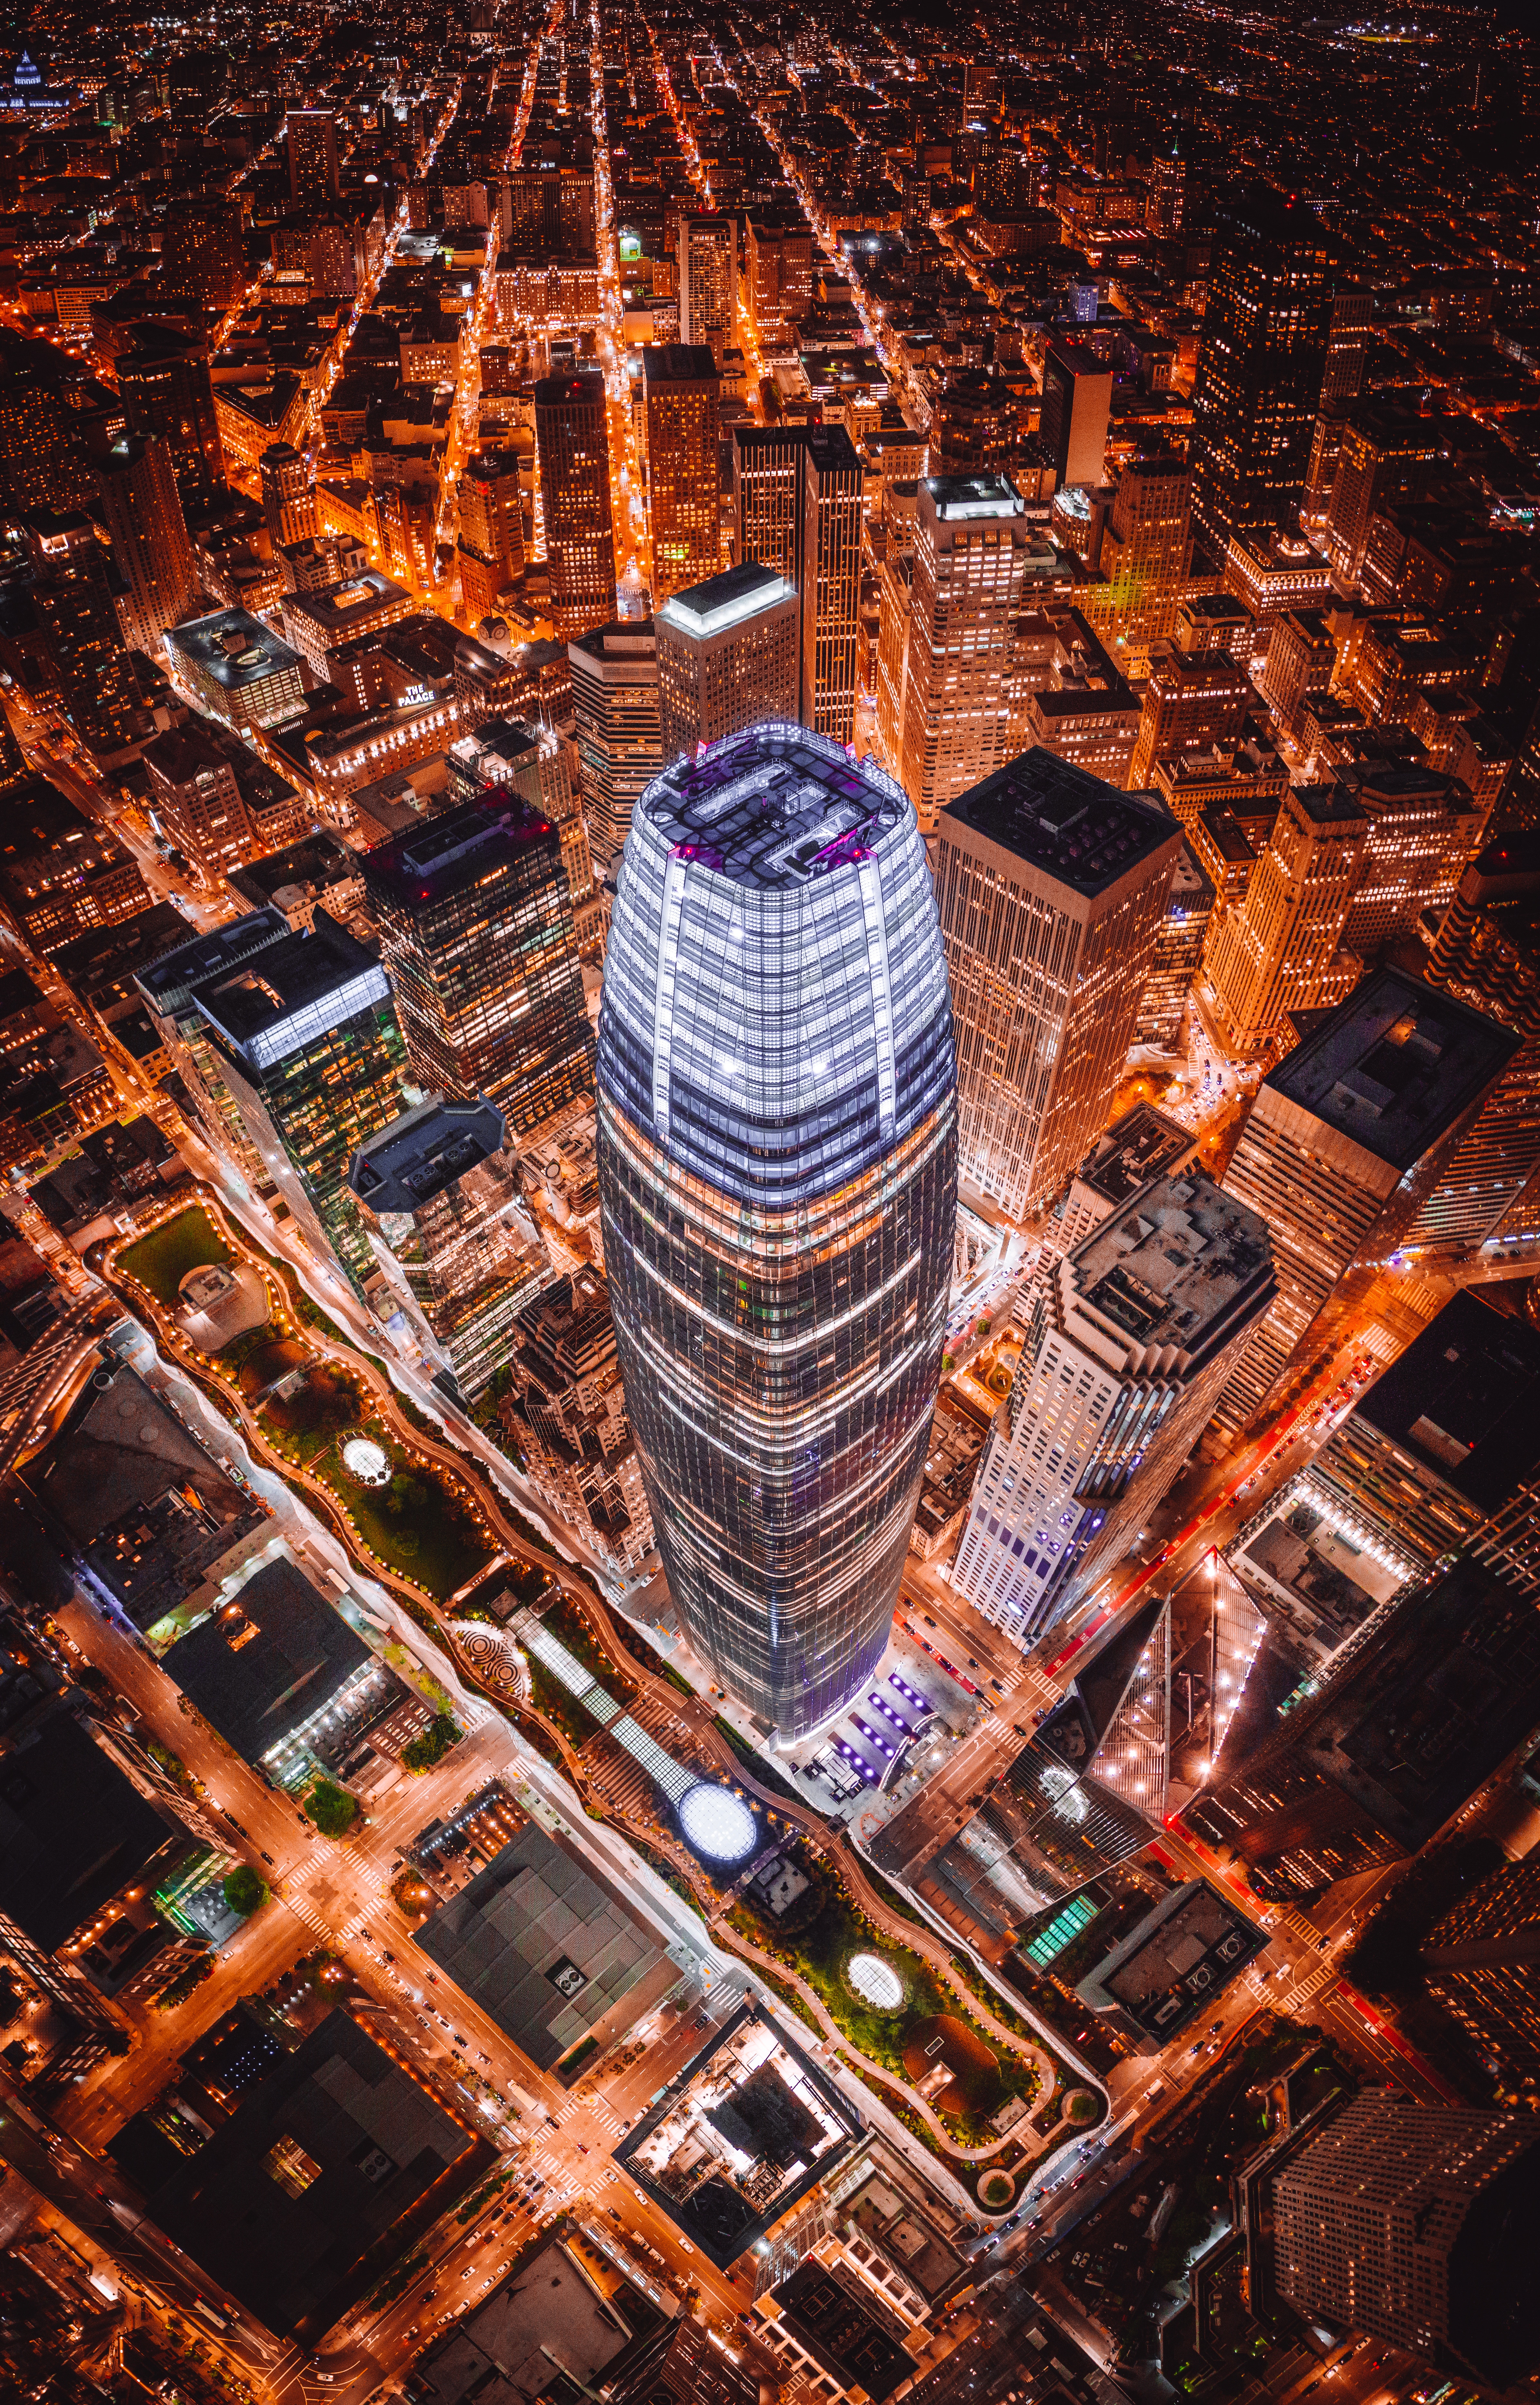 night city, roof, tower, cities, architecture, building, view from above, skyscrapers, roofs, towers